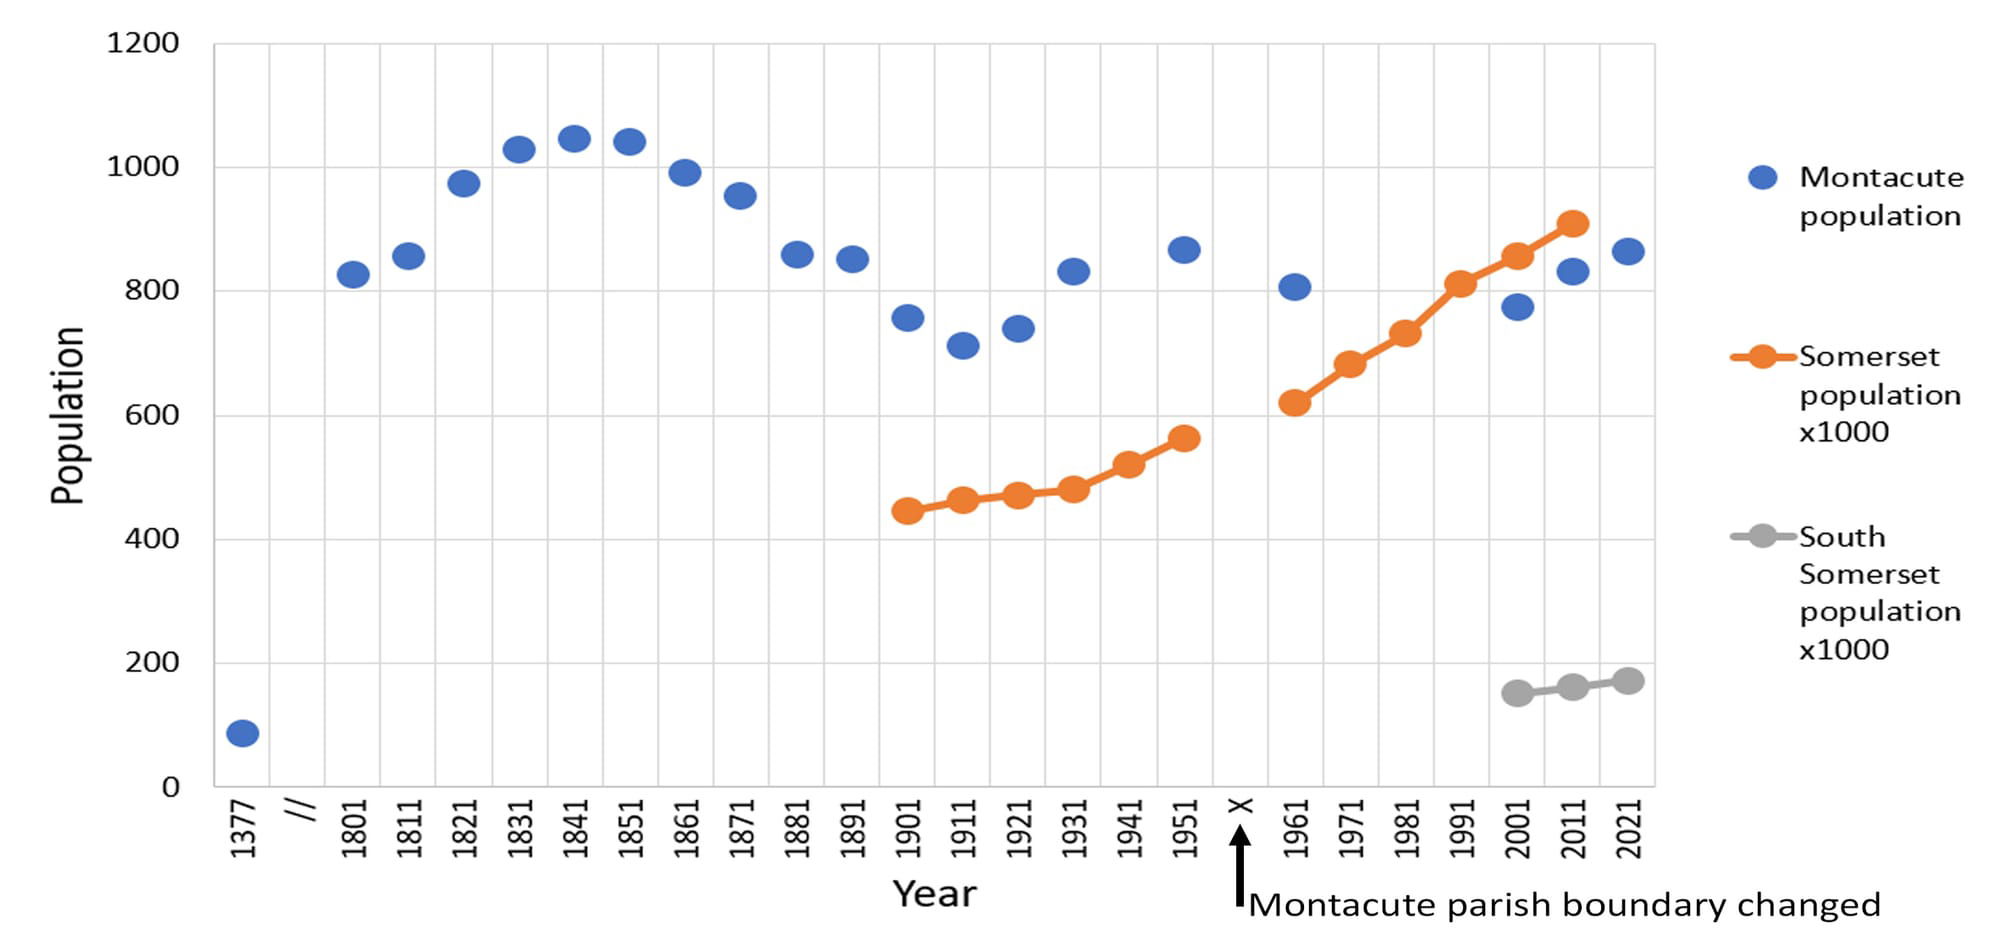 Graph with with year (starting at 1377 then jumping to 1801 with 10-yearly increments to 2021) along the x-axis. Population (range 0 to 1200) is along the y-axis. 3 sets of data are plotted: Montacute population, Somerset population x1000, and South Somerset population x1000. Montacute population (blue markers) is around 850 in 1800, peaking at around 1150 in 1840, dropping to around 700 in 1911, and now around 850. Somerset population (brown markers) is plotted from approx. 450,000 in 1901 to approx. 900,000 in 2011. South Somerset population (grey markers) rises from around 160,000 in 2001 to approx. 190,000 in 2011.